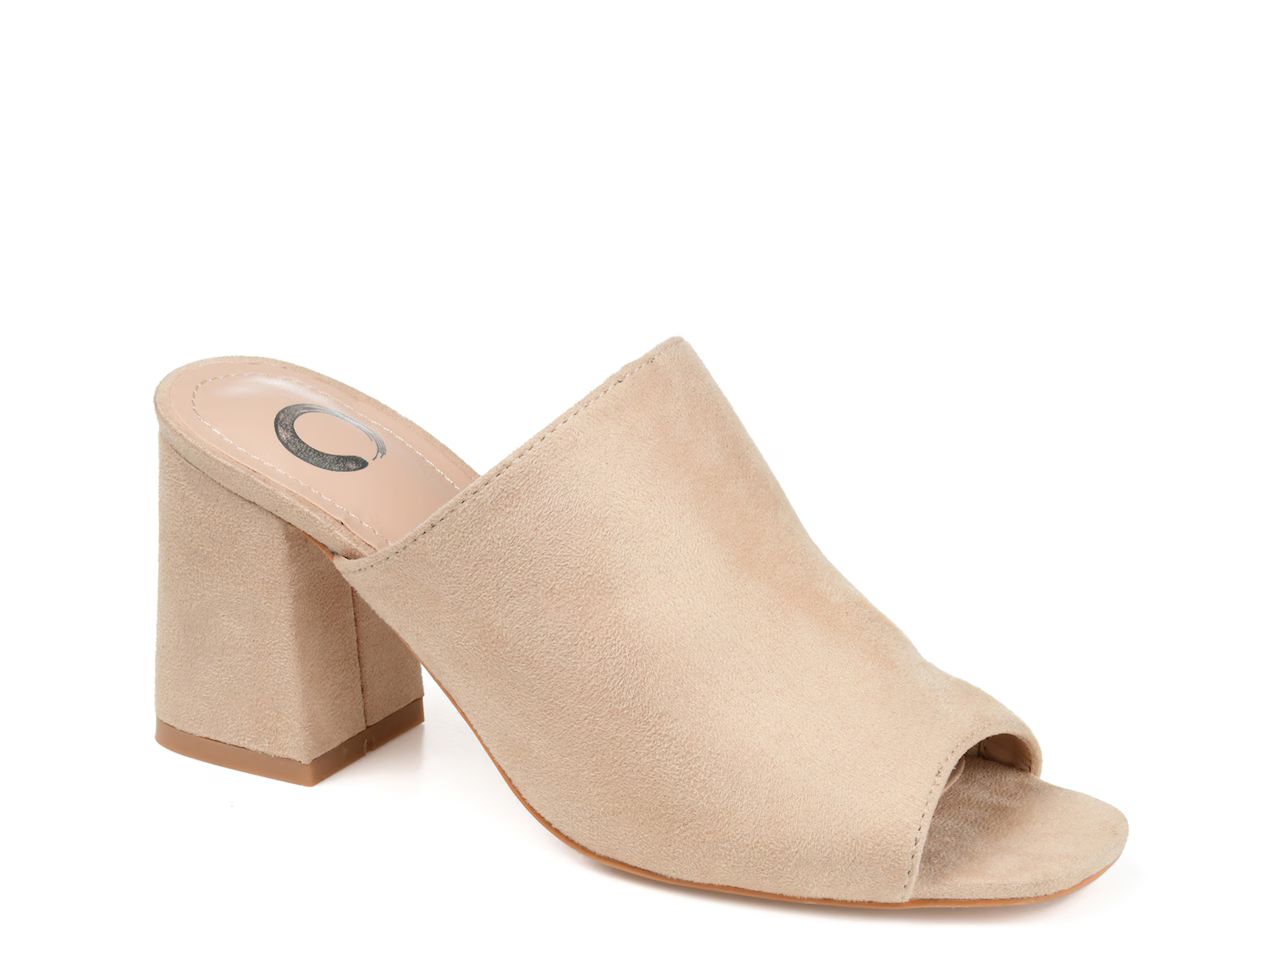 Journee Collection Adelaide Sandal | DSW